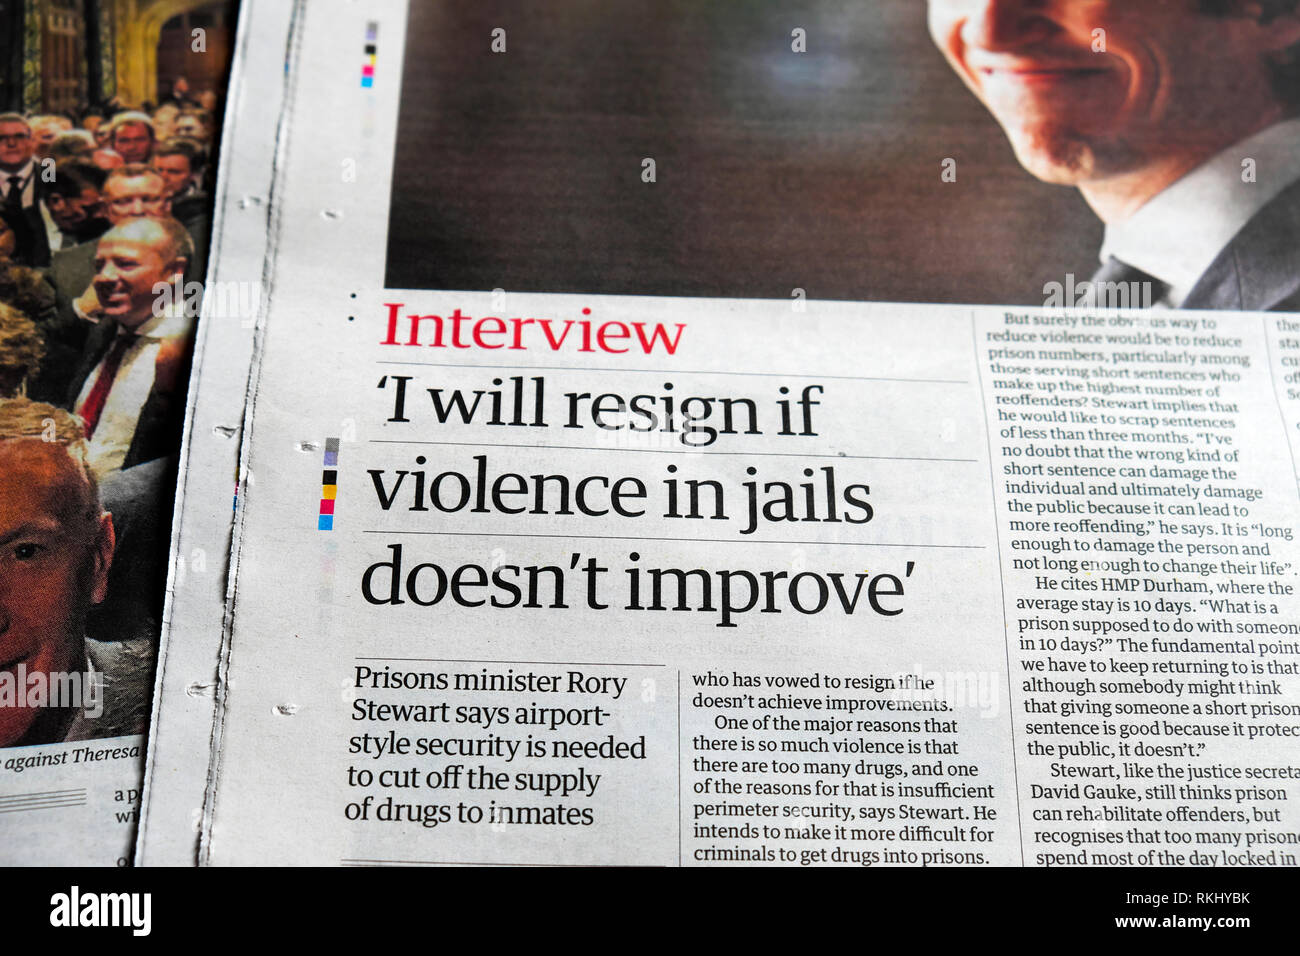 Prisons minister Rory Stewart interview  'I will resign if violence in jails doesn't improve' in Guardian newspaper January 2019 London England UK Stock Photo